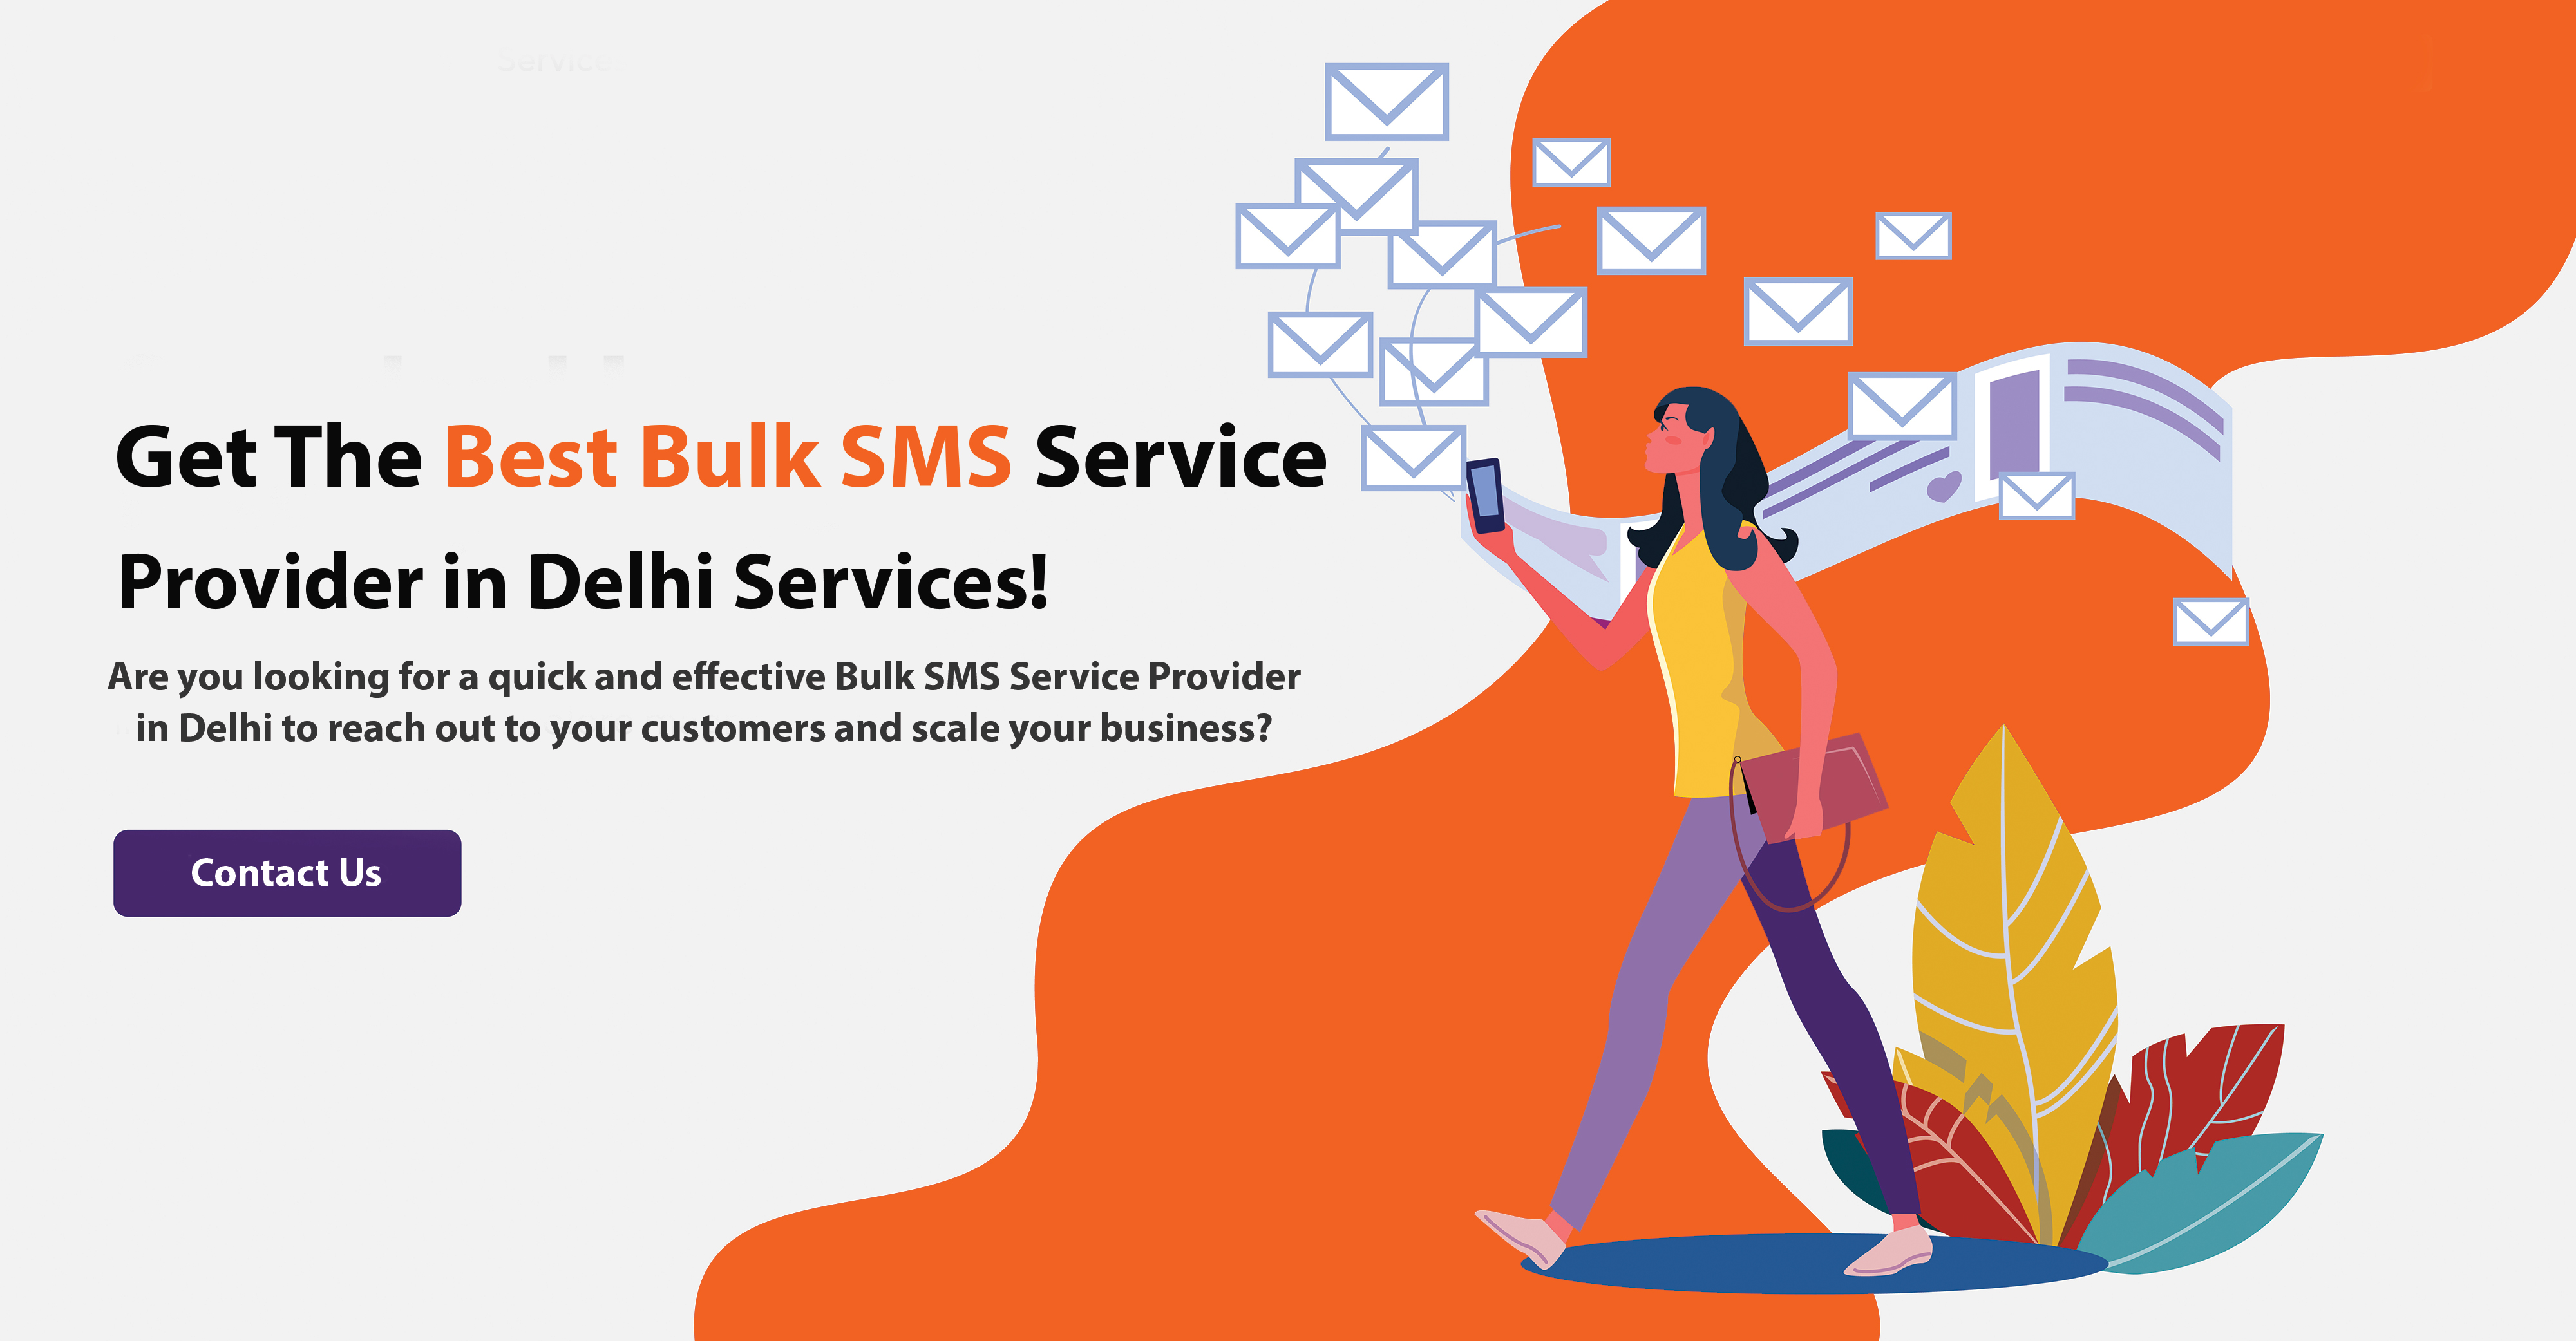 Get The Best Bulk SMS Service Provider in Delhi Services!